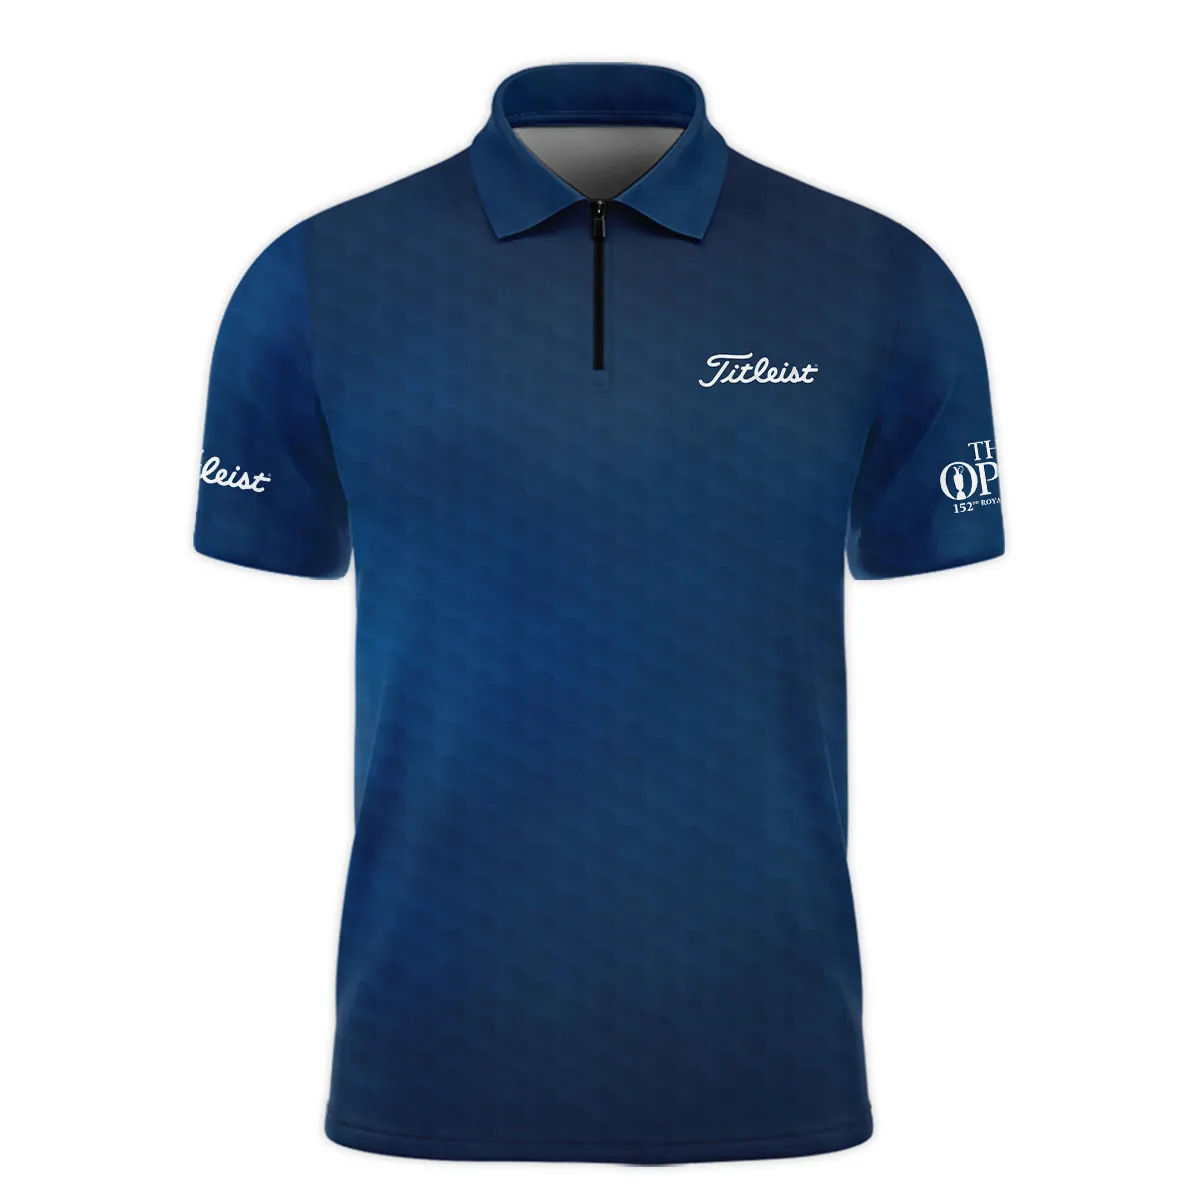 Golf Jordan Spieth Fans Loves 152nd The Open Championship Titleist Polo Shirt Style Classic